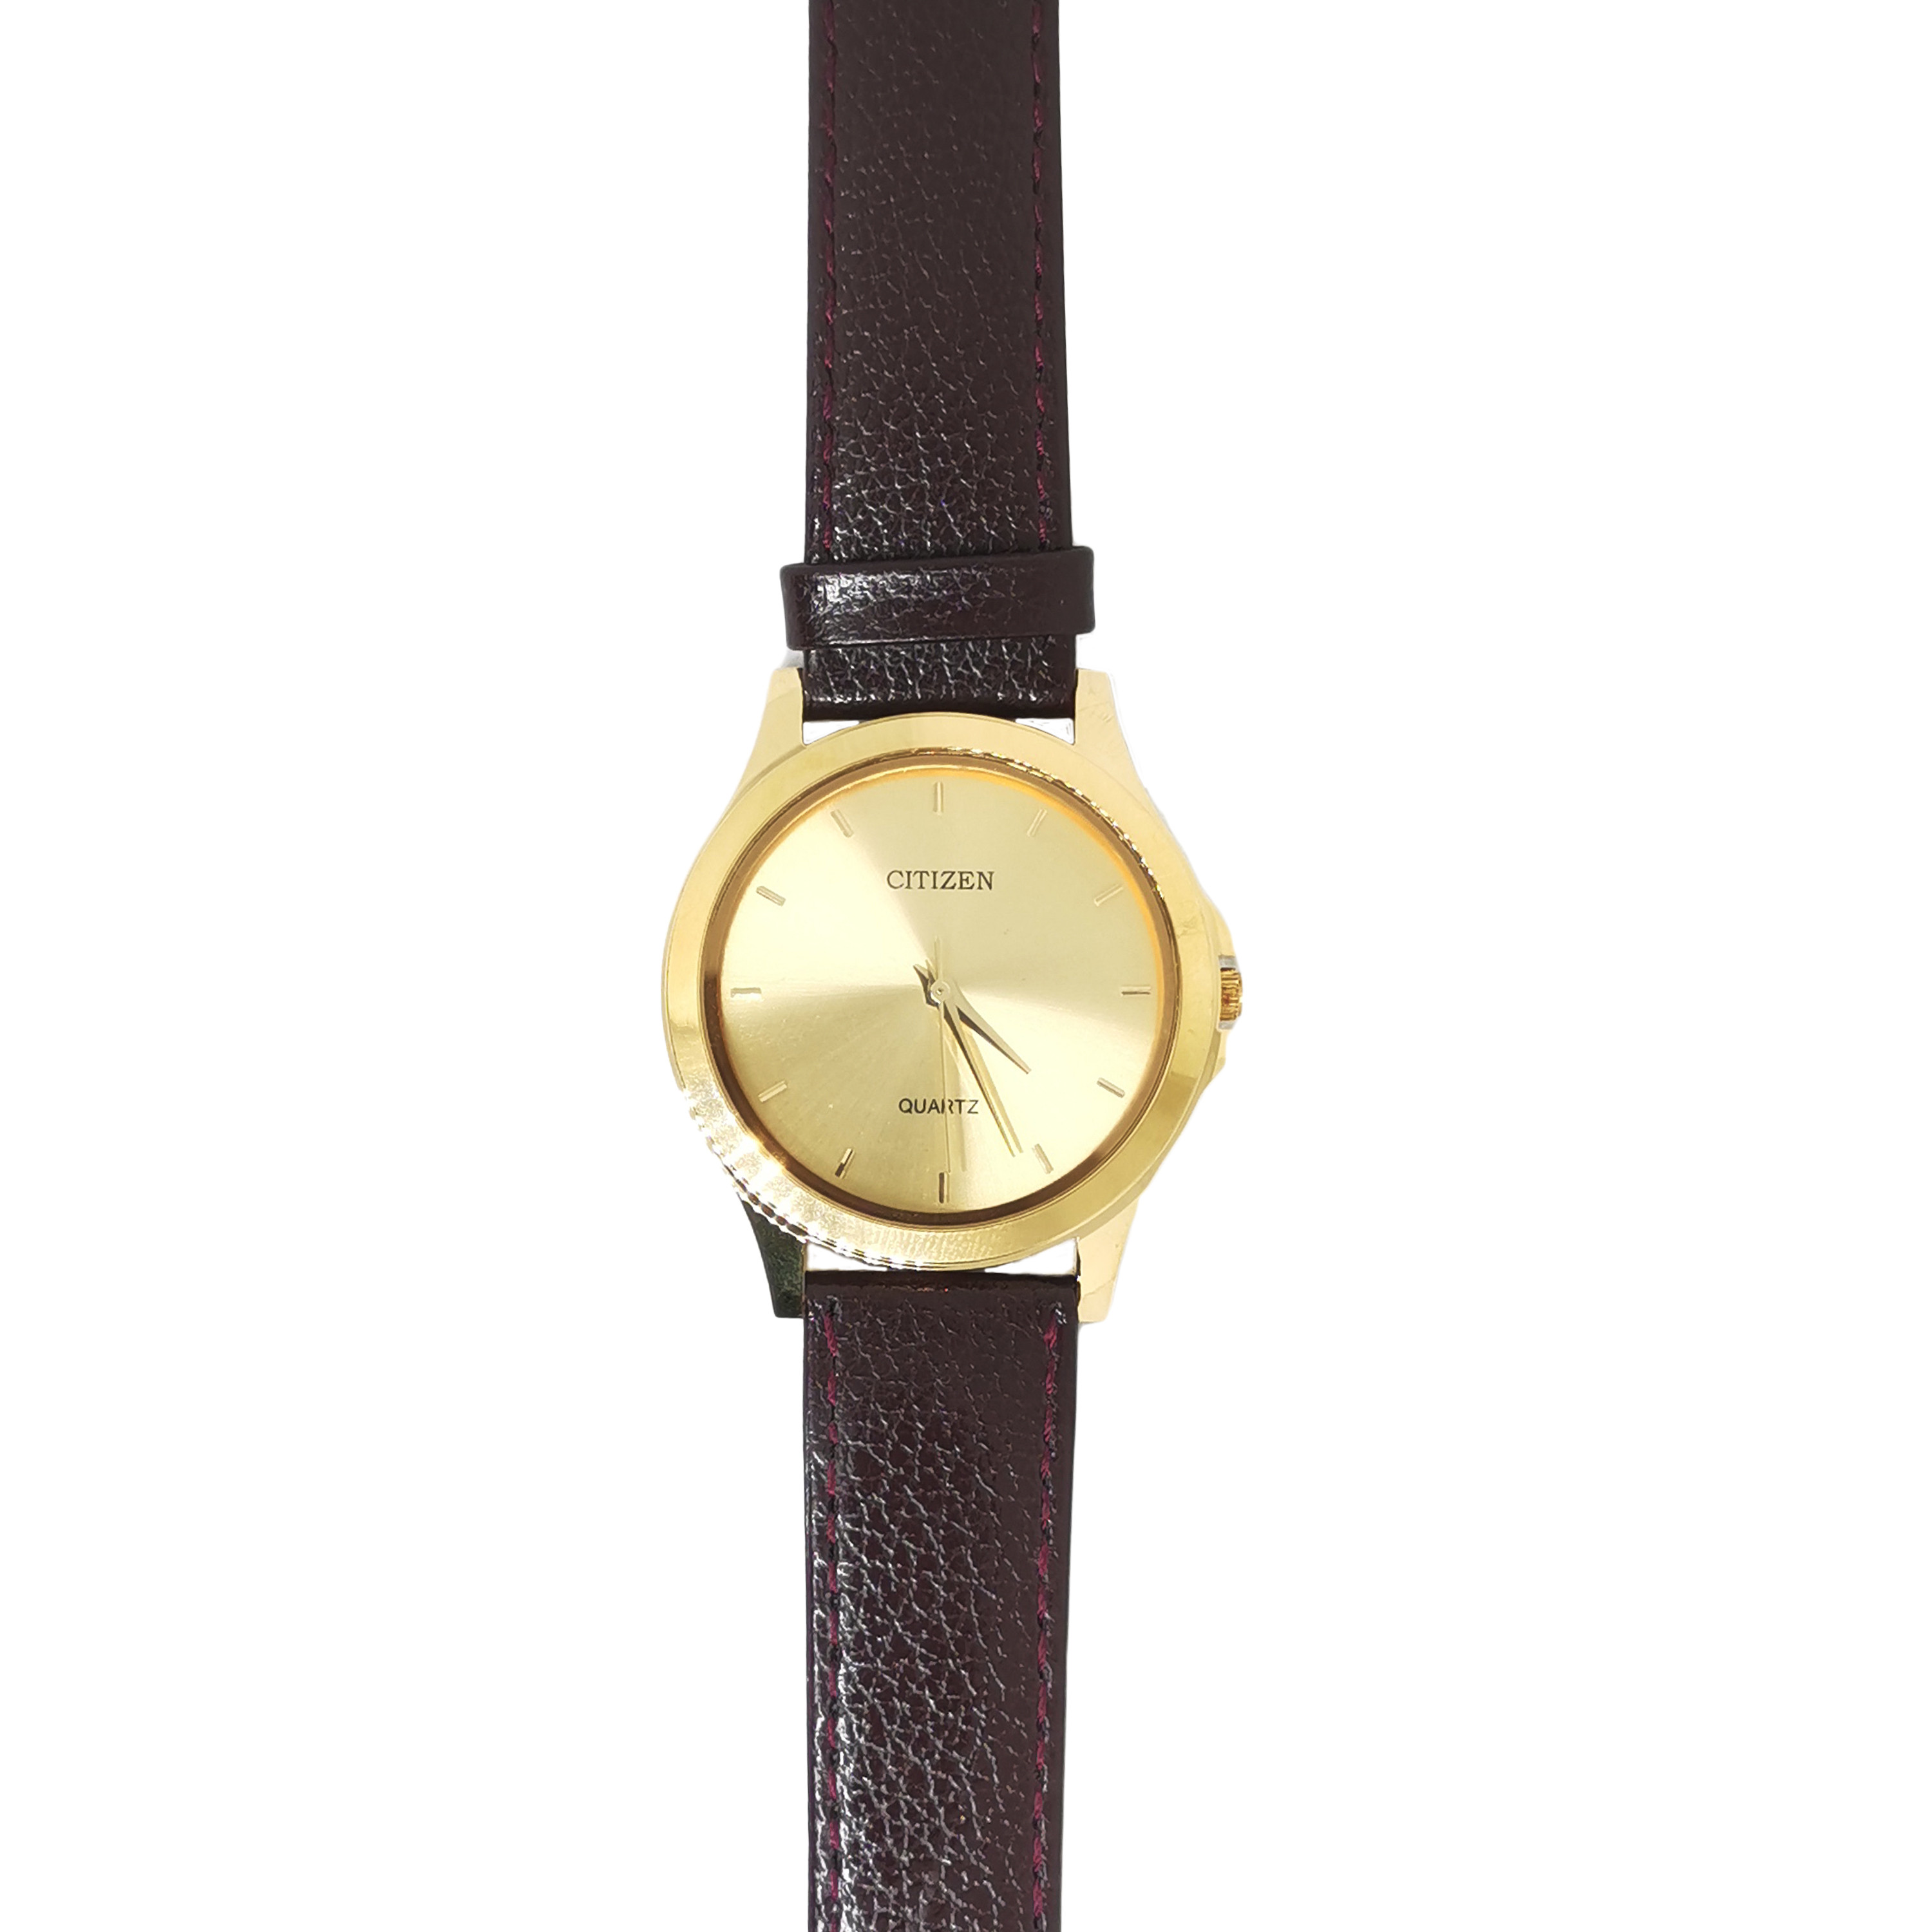 Citizen Gents Leather Watch - Brown